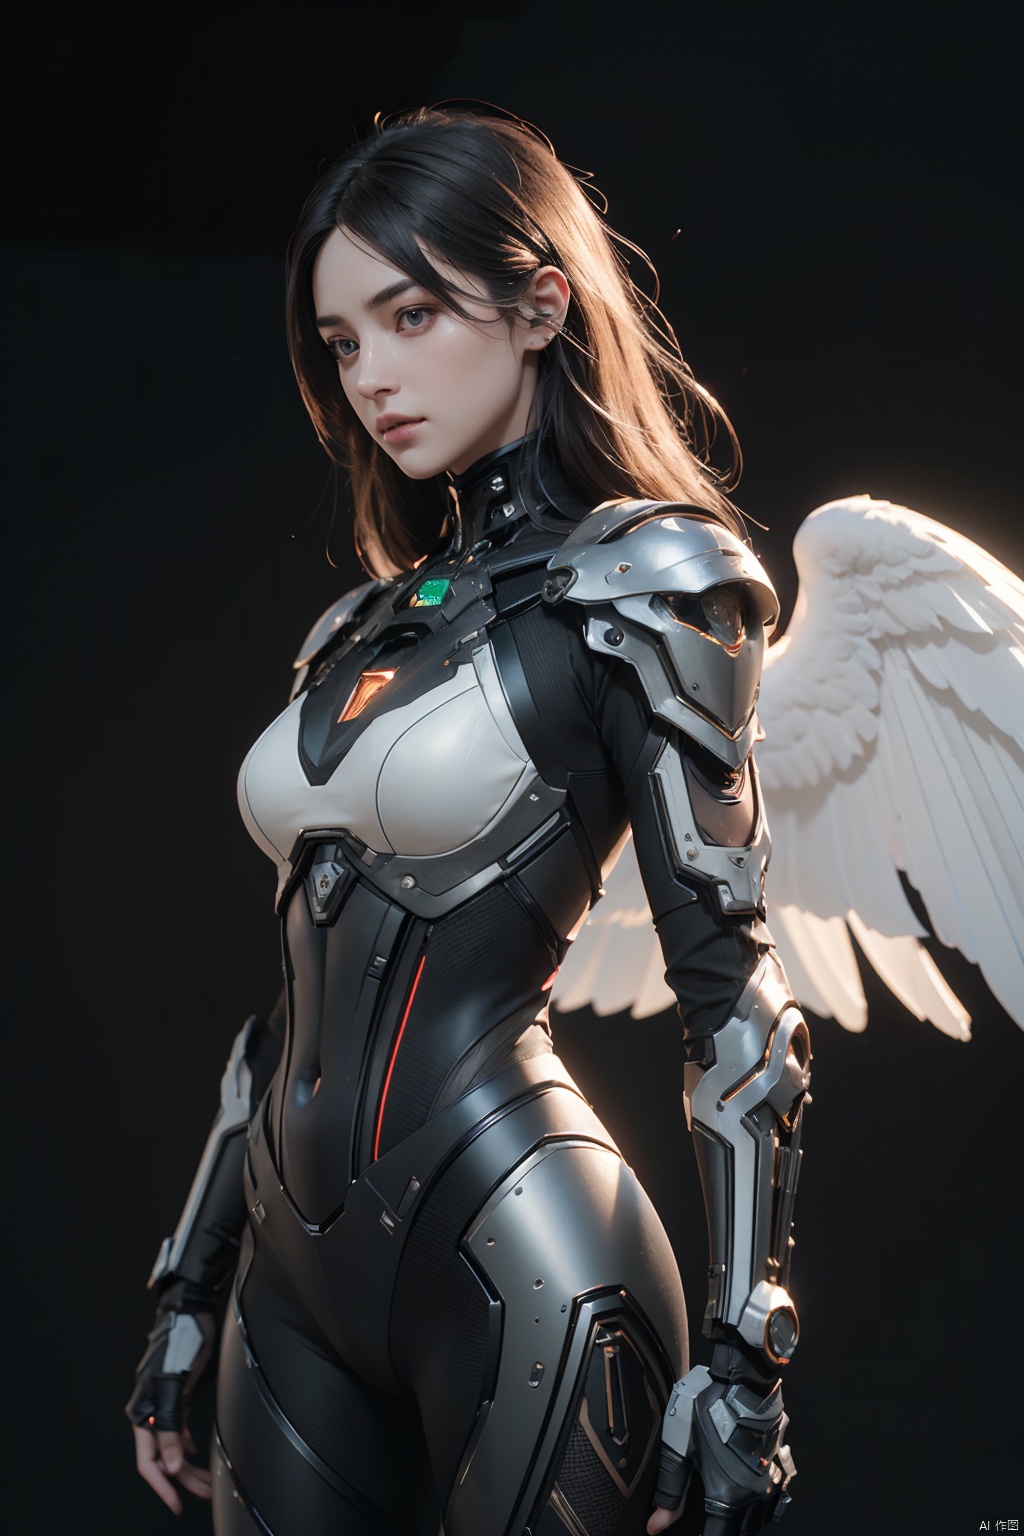 (Two mechanical wings:1.2),((Best quality)),((masterpiece)),(detailed:1.2),3D,an image of a beautiful cyberpunk female with all black armour,HDR (High Dynamic Range),Ray Tracing,NVIDIA RTX,Super-Resolution,Unreal 5,Subsurface scattering,PBR Texturing,Post-processing,Anisotropic Filtering,Depth-of-field,Maximum clarity and sharpness,Multi-layered textures,Albedo and Specular maps,Surface shading,Accurate simulation of light-material interaction,Perfect proportions,Octane Render,Two-tone lighting,Wide aperture,Low ISO,White balance,Rule of thirds,8K RAW,